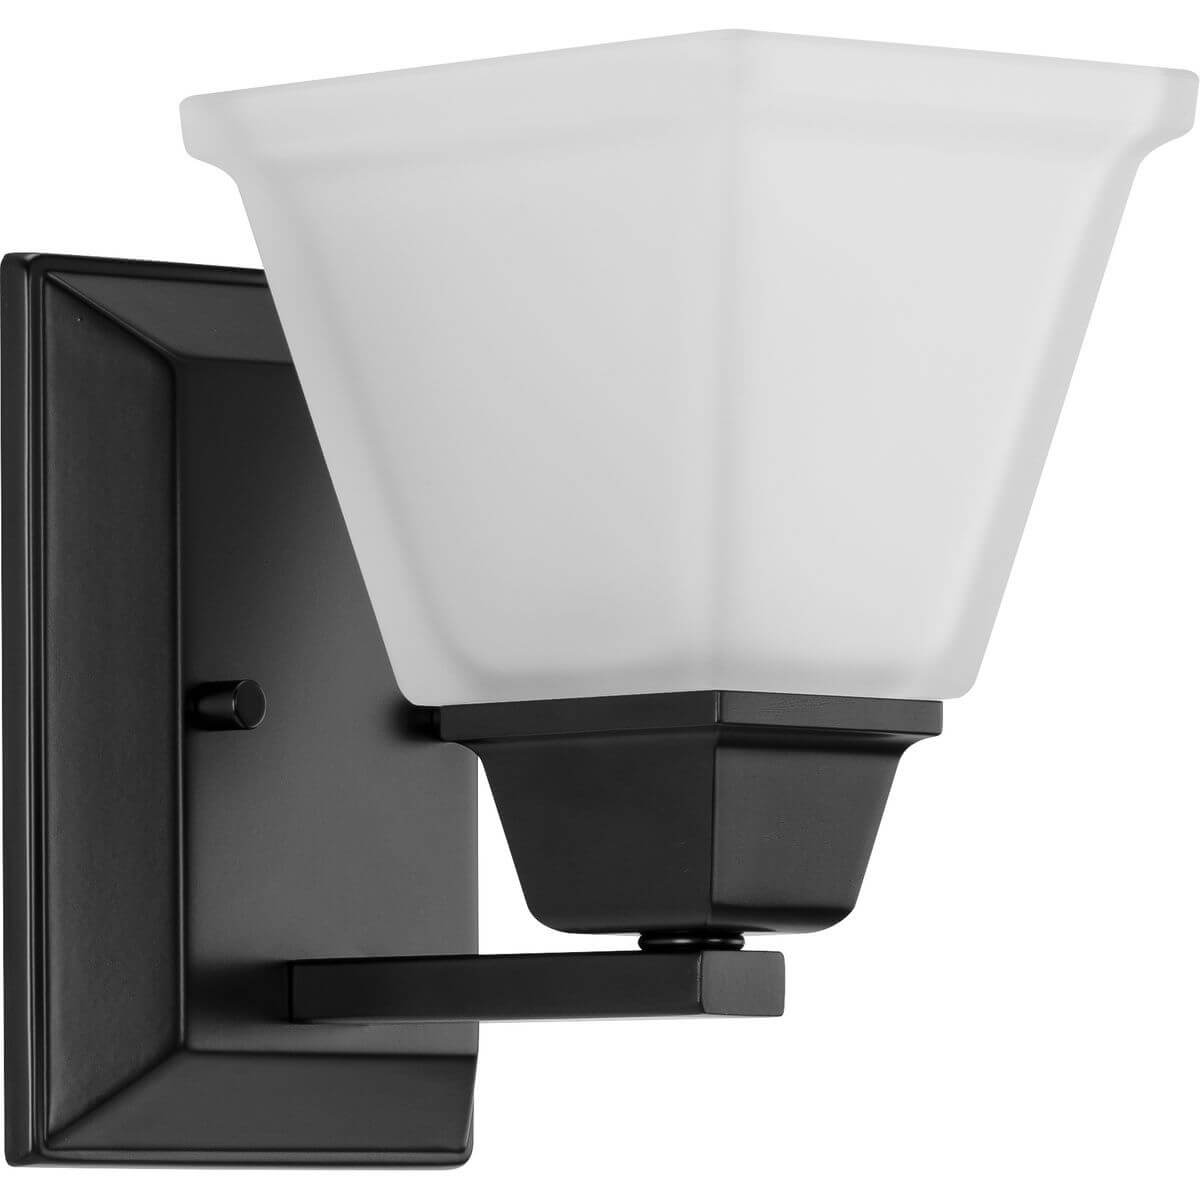 Progress Lighting Clifton Heights 1 Light 7 inch Bath Vanity Light in Matte Black with Etched Glass P300158-31M